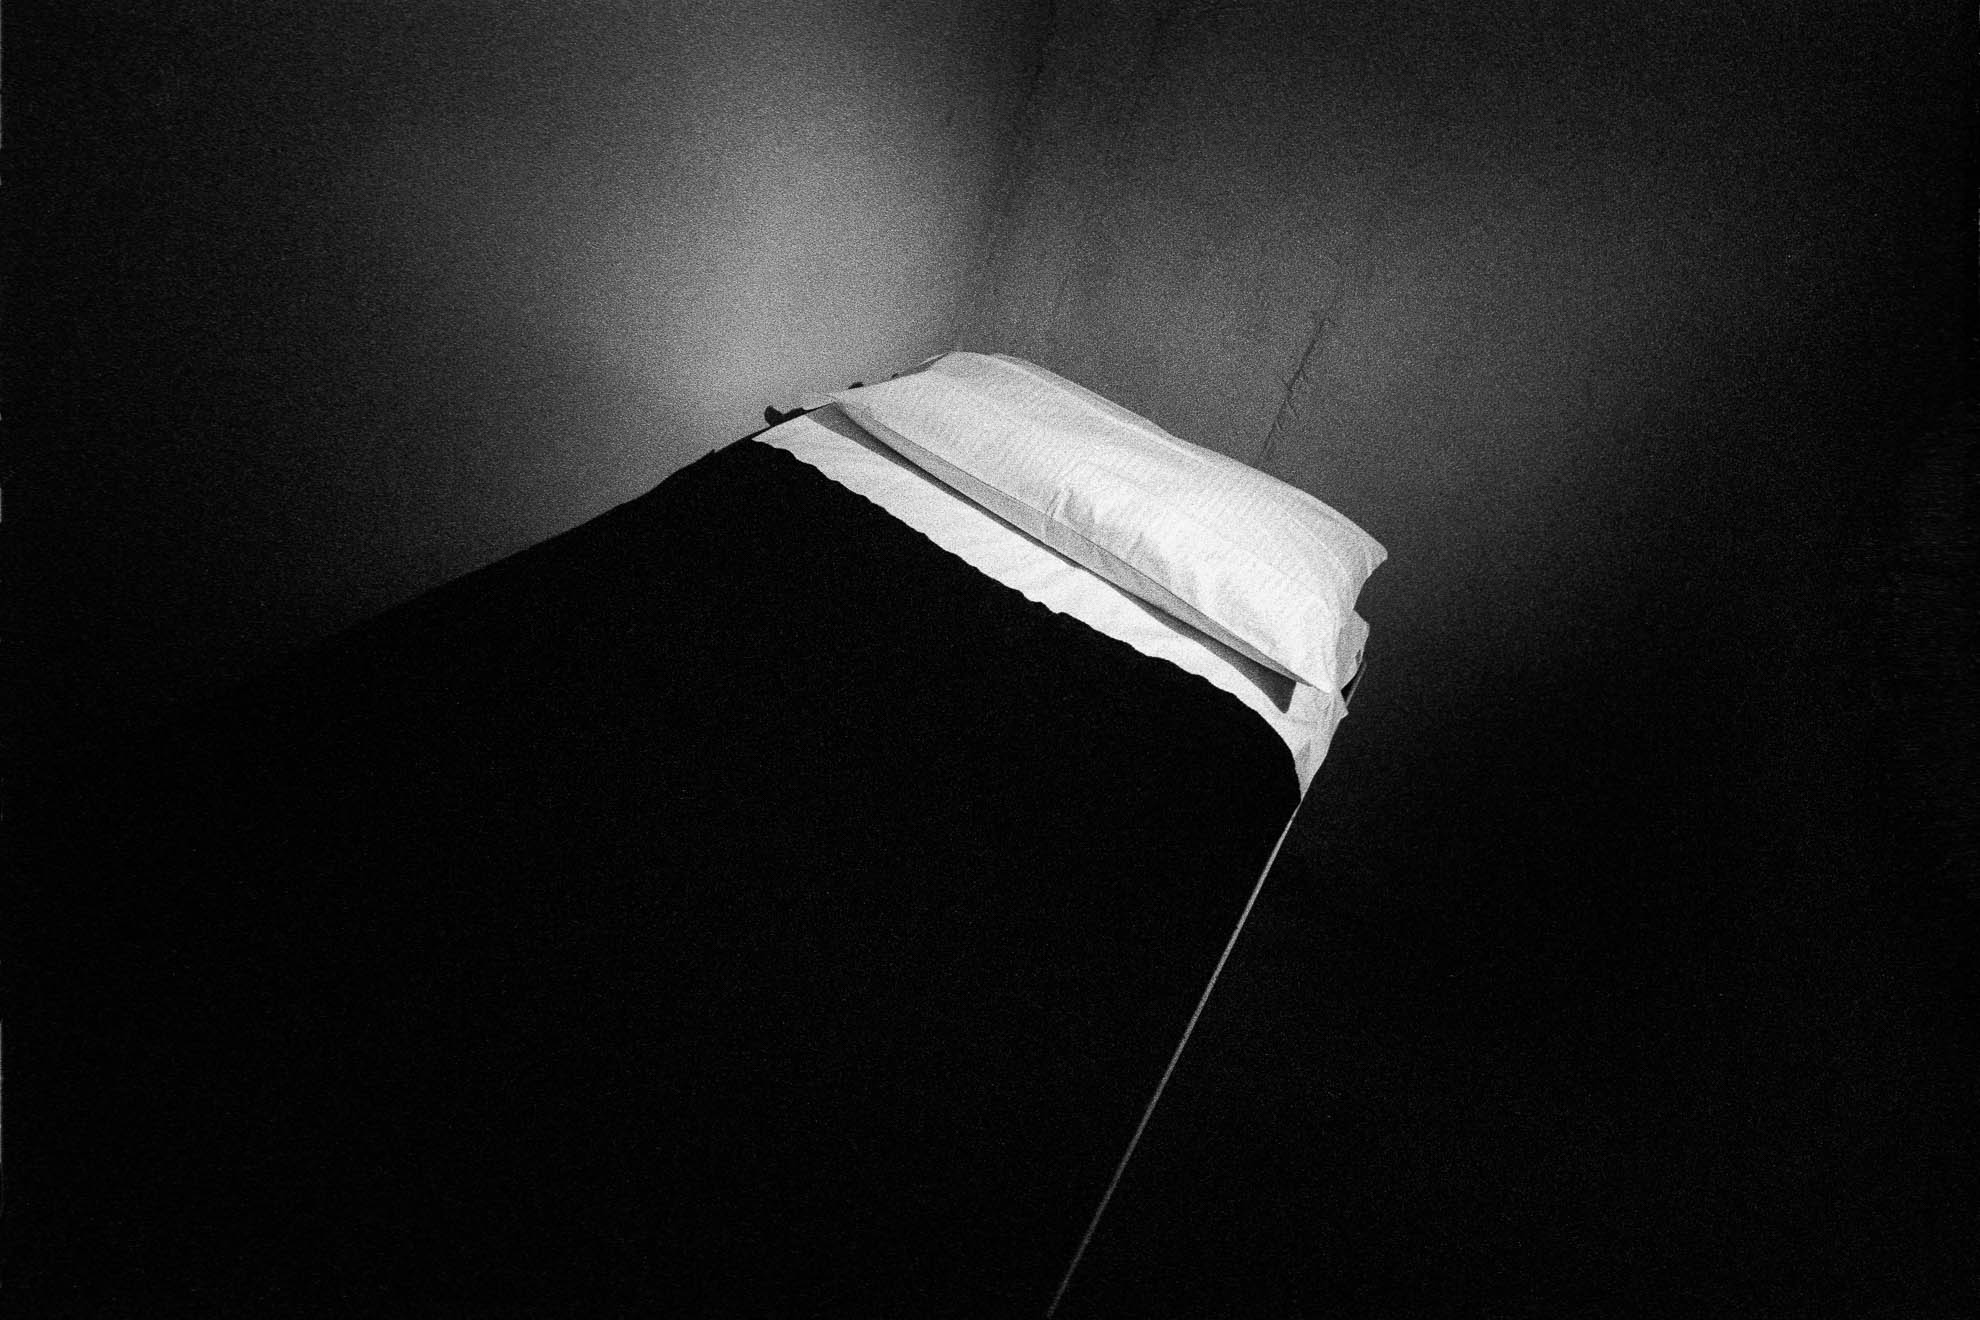 death penalty, photography, photos, execution, prison, documentary, north carolina, cell, death watch